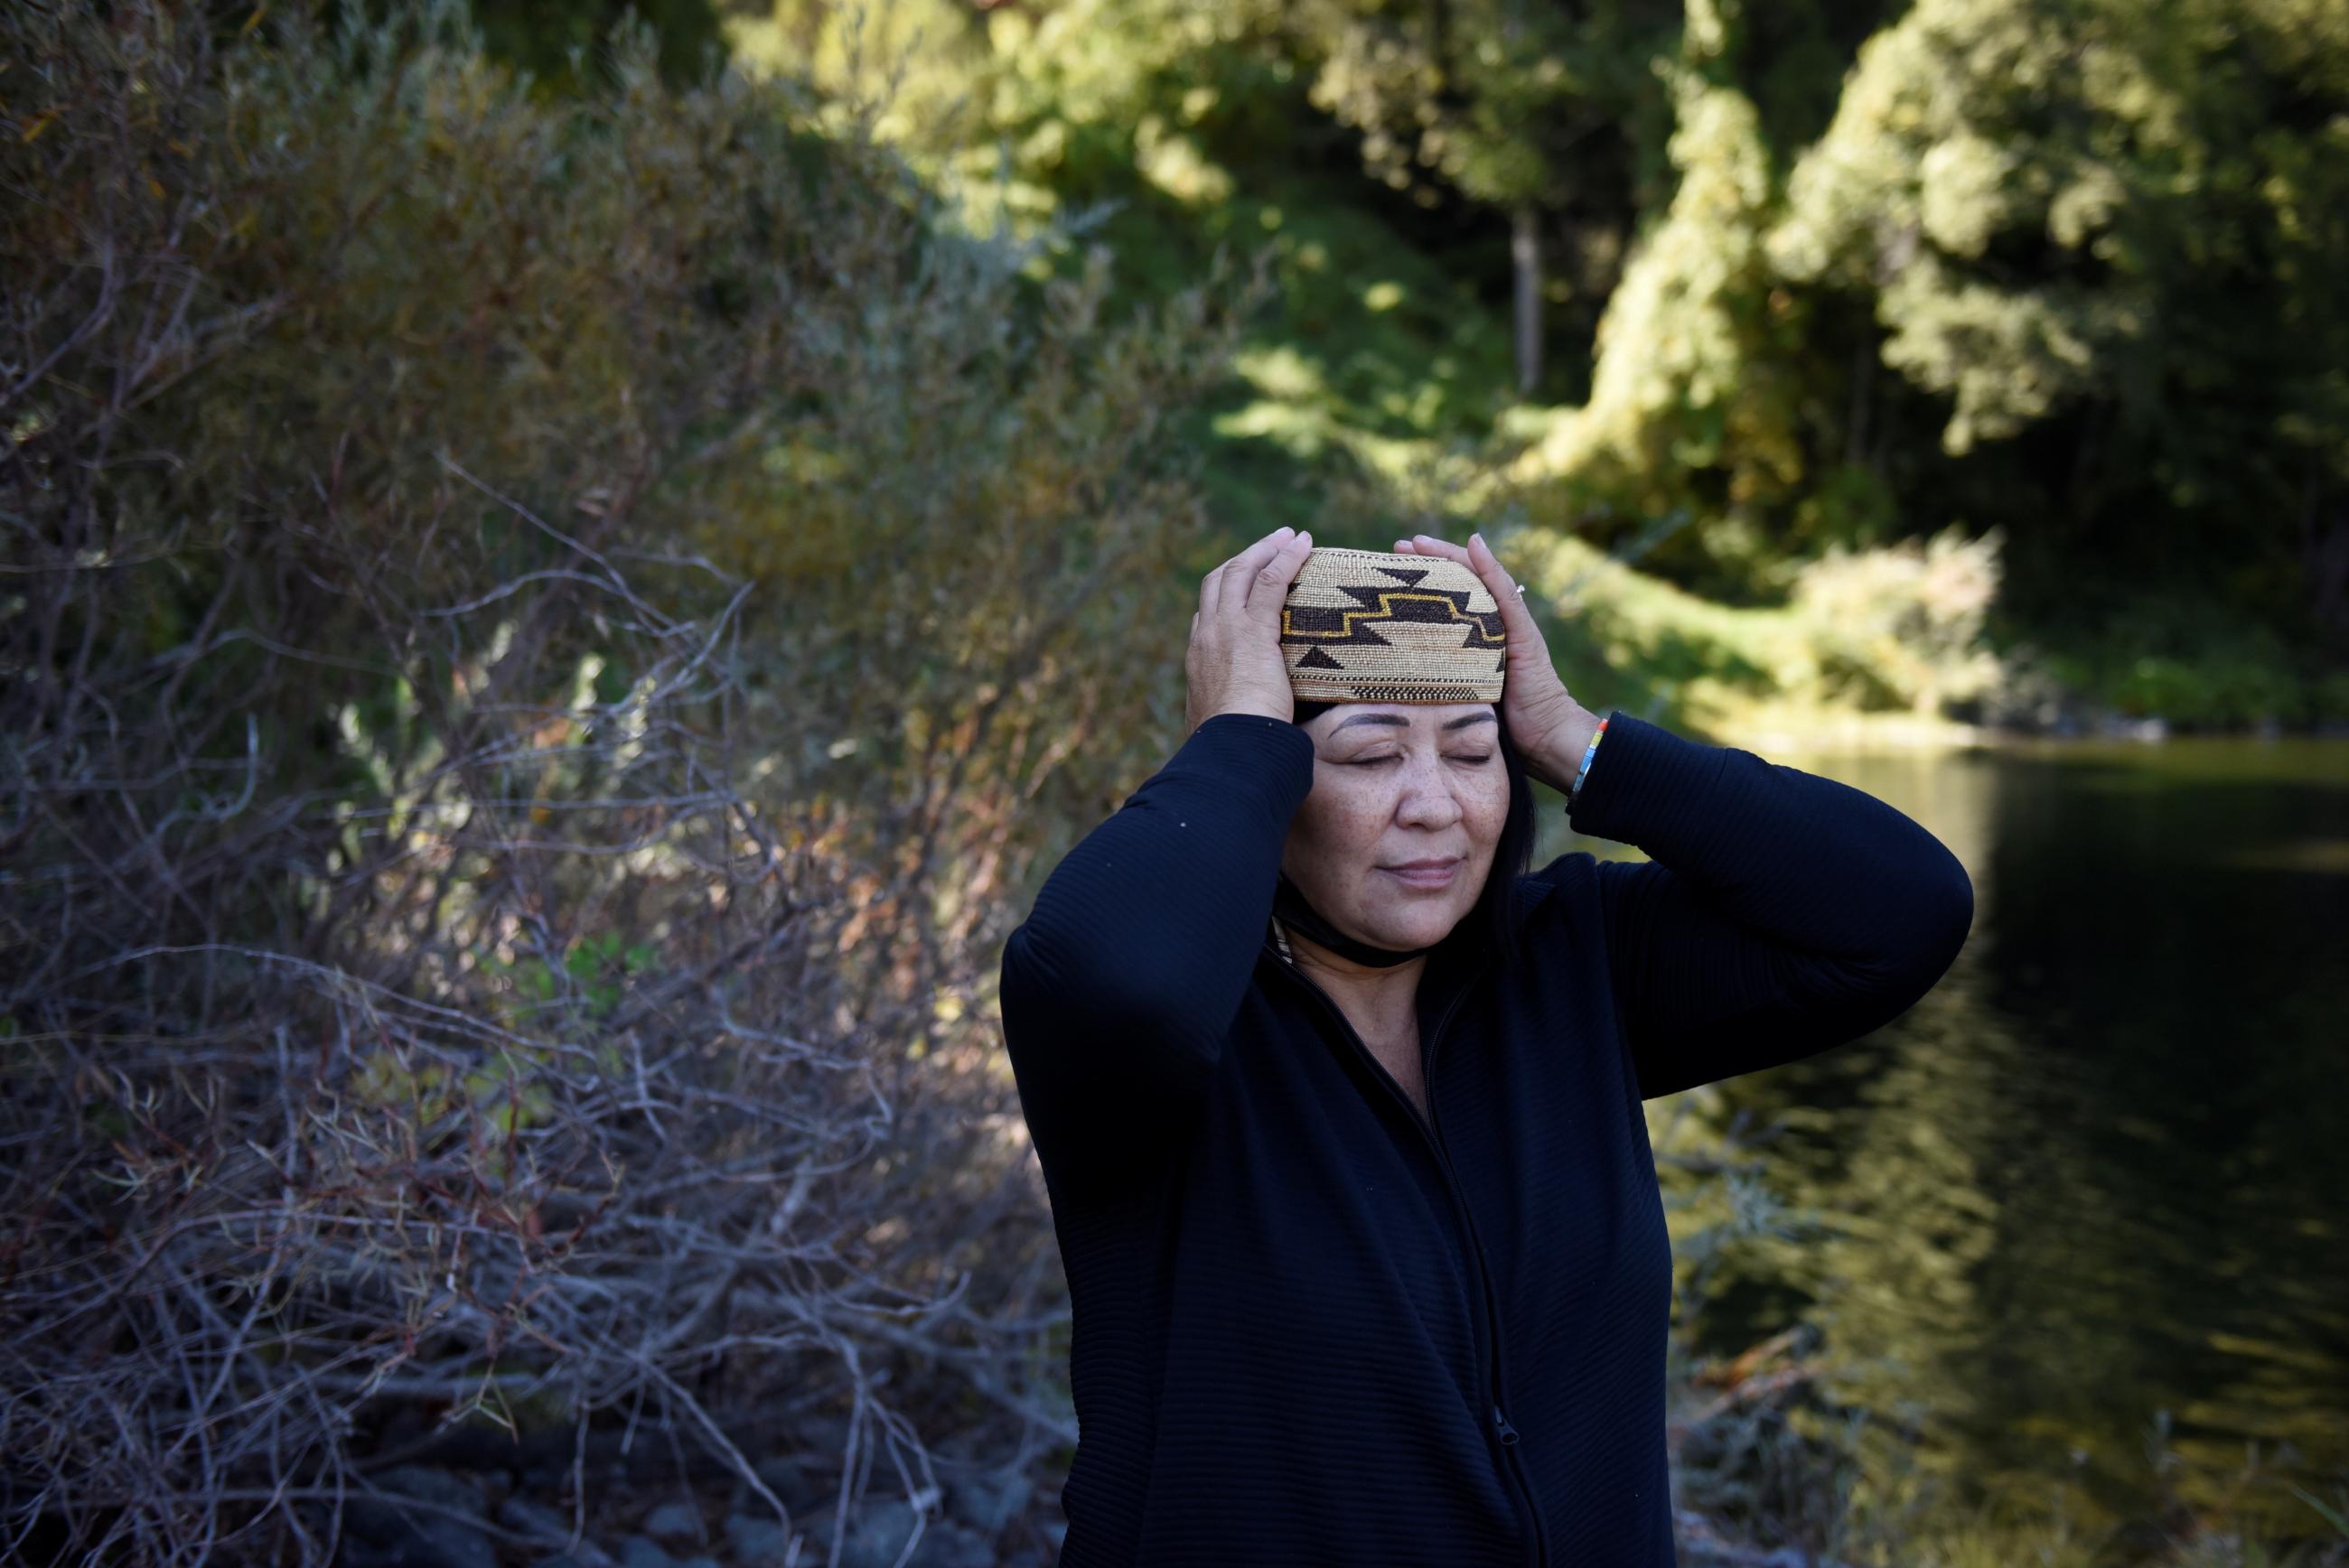 an indigenous American woman wearing a dark blue tunic places a traditional cap on her head